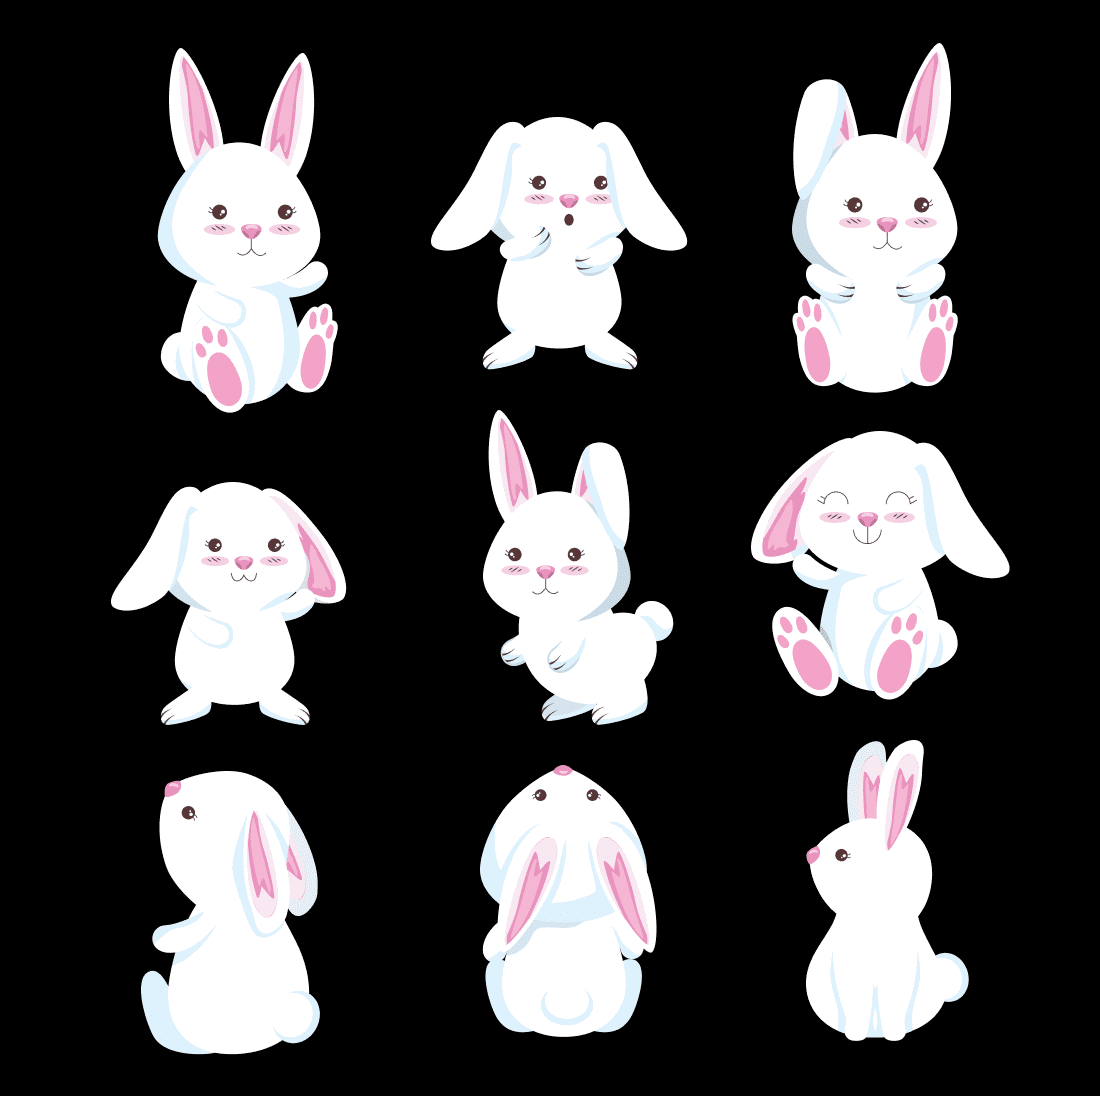 Bunch of white rabbits with different expressions.